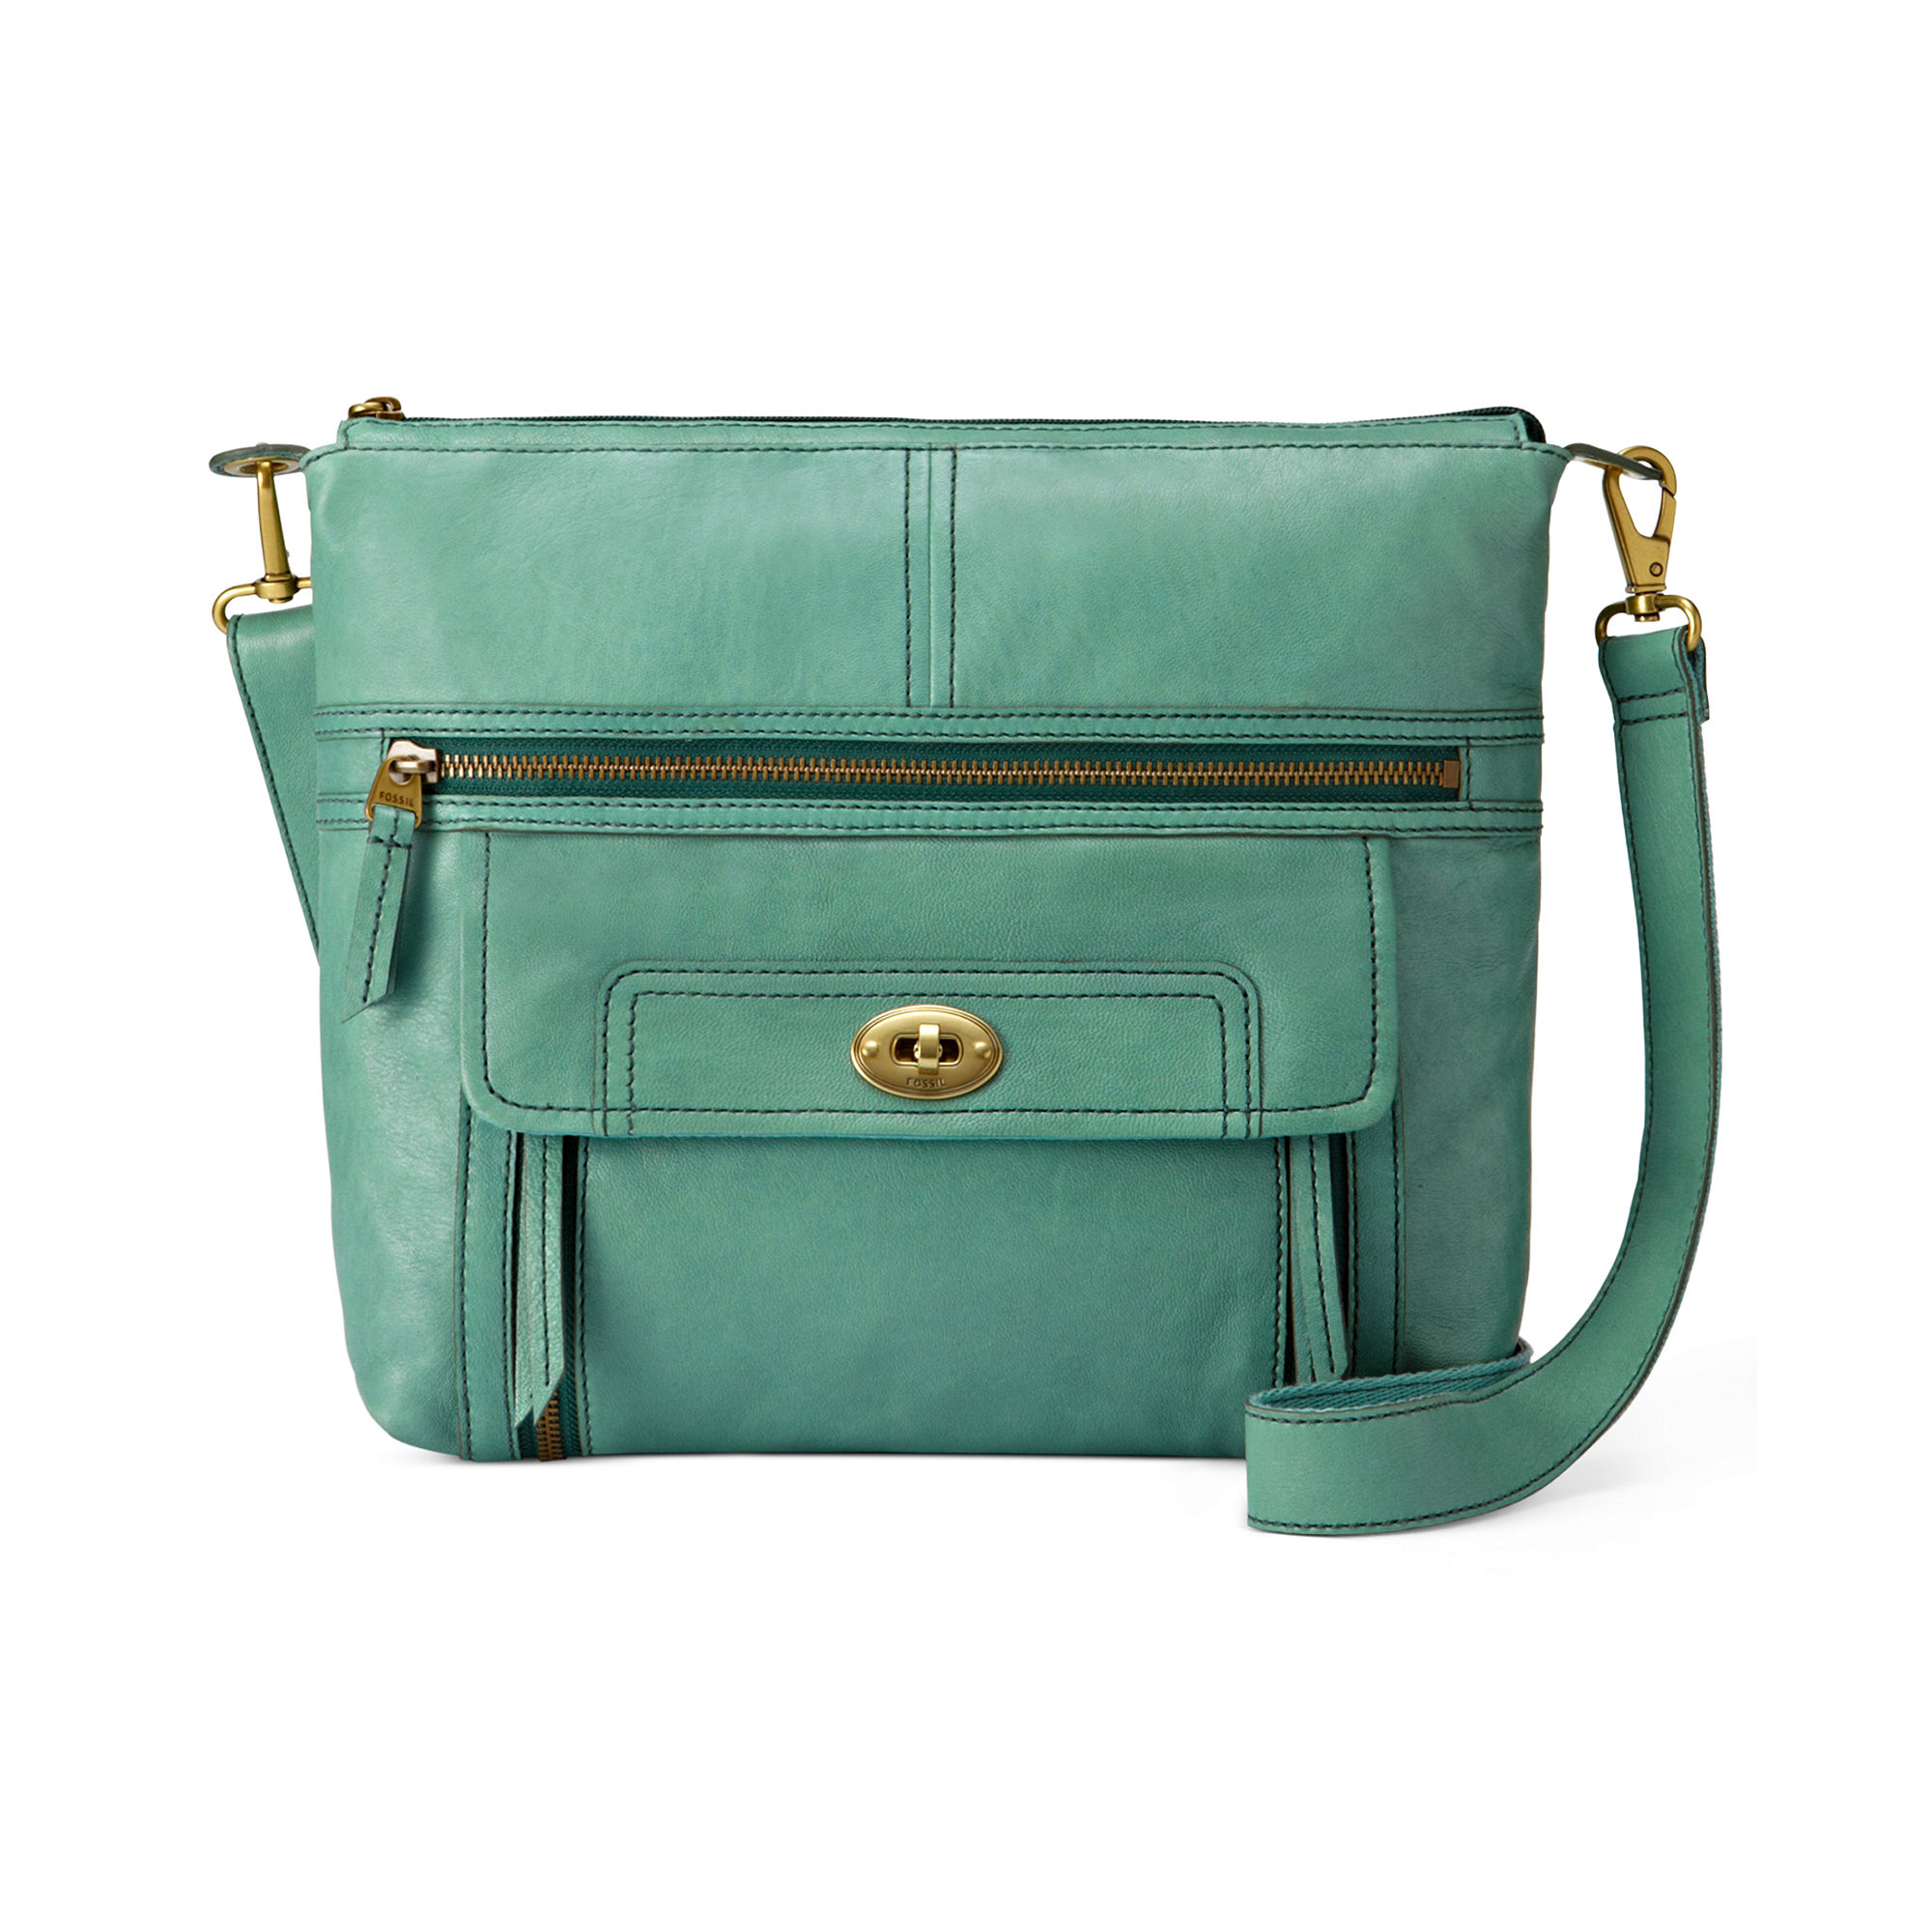 Lyst - Fossil Stanton Leather Top Zip Bag in Green